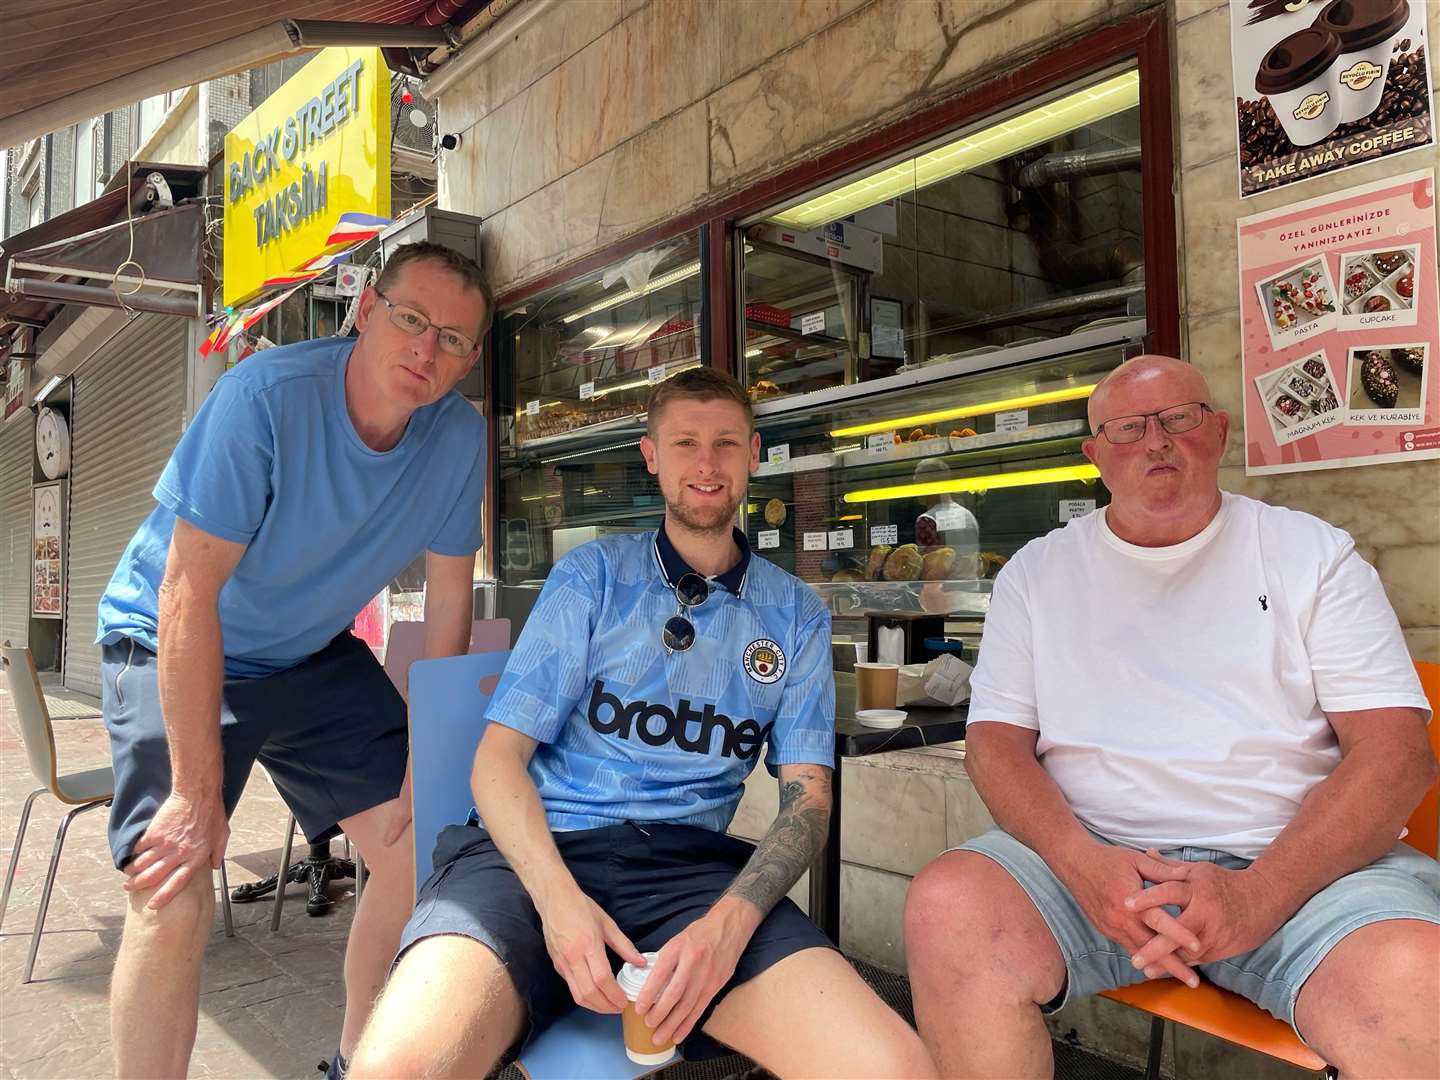 Man City fans (left to right) Wayne Jeffries, 59, Stephen Woods, 30, and Dave Faulkner, 63, in central Istanbul (Luke O’Reilly/PA)